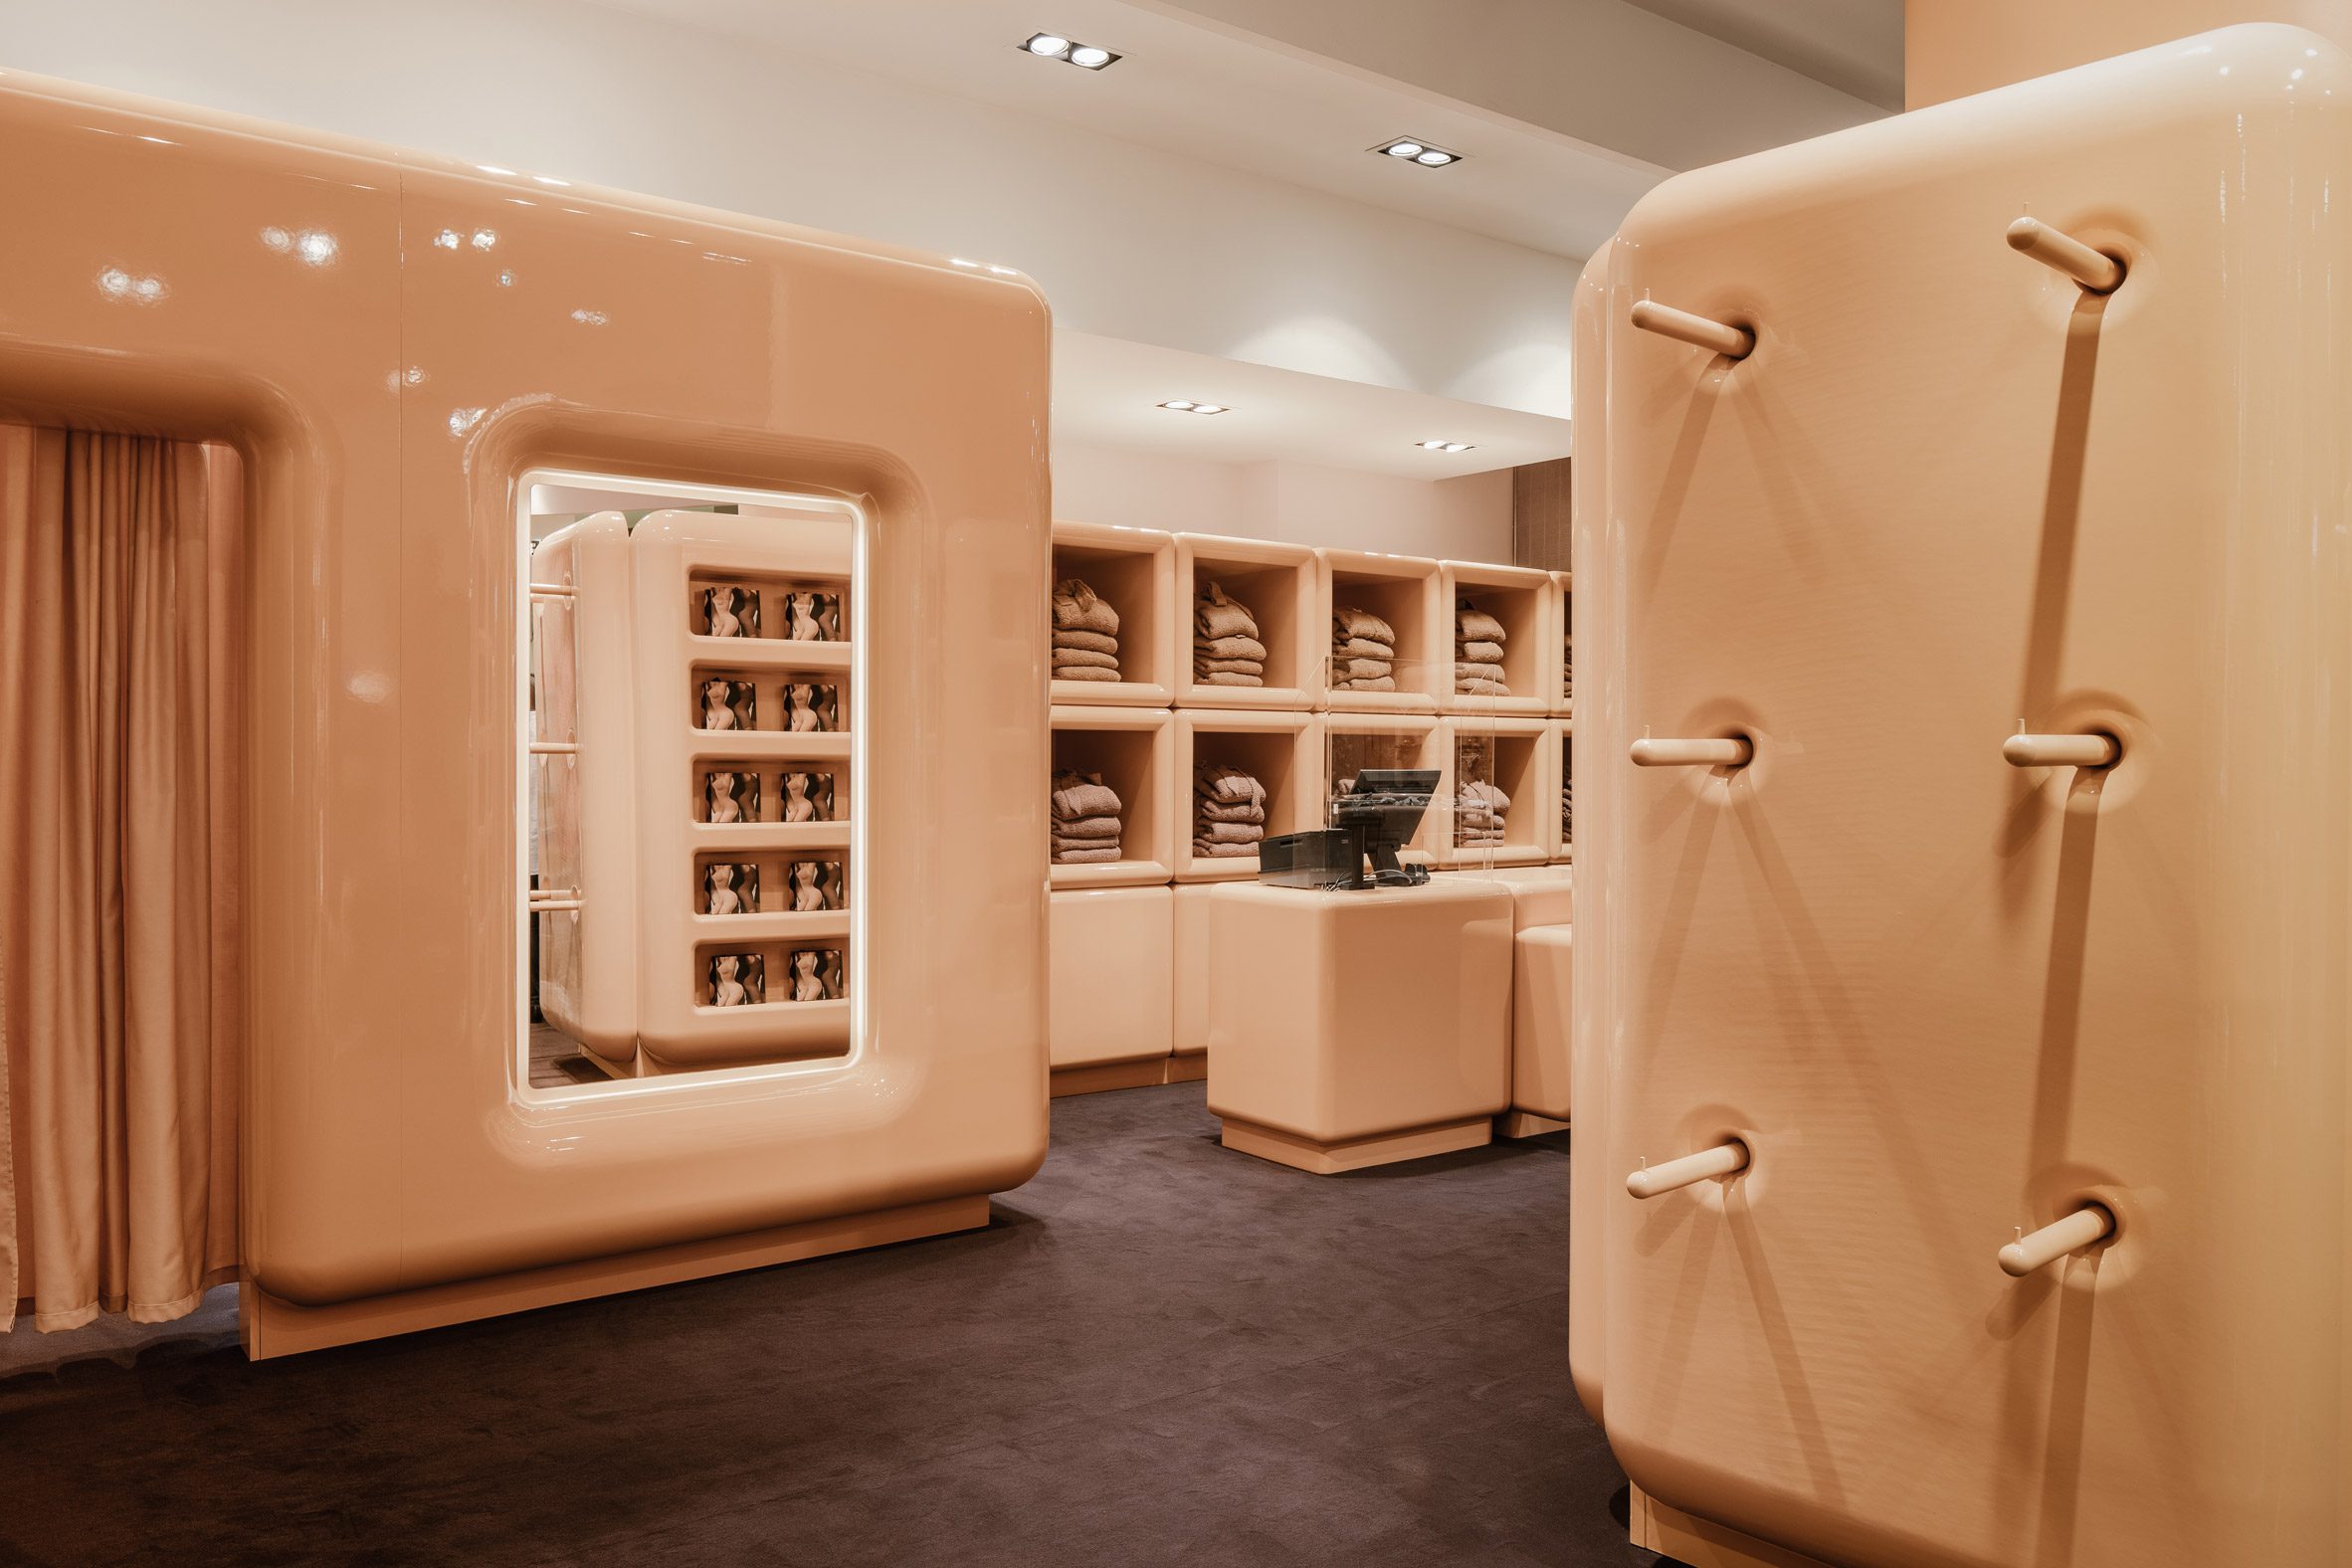 The lossy, beige interior of the Paris SKIMS pop-up shop